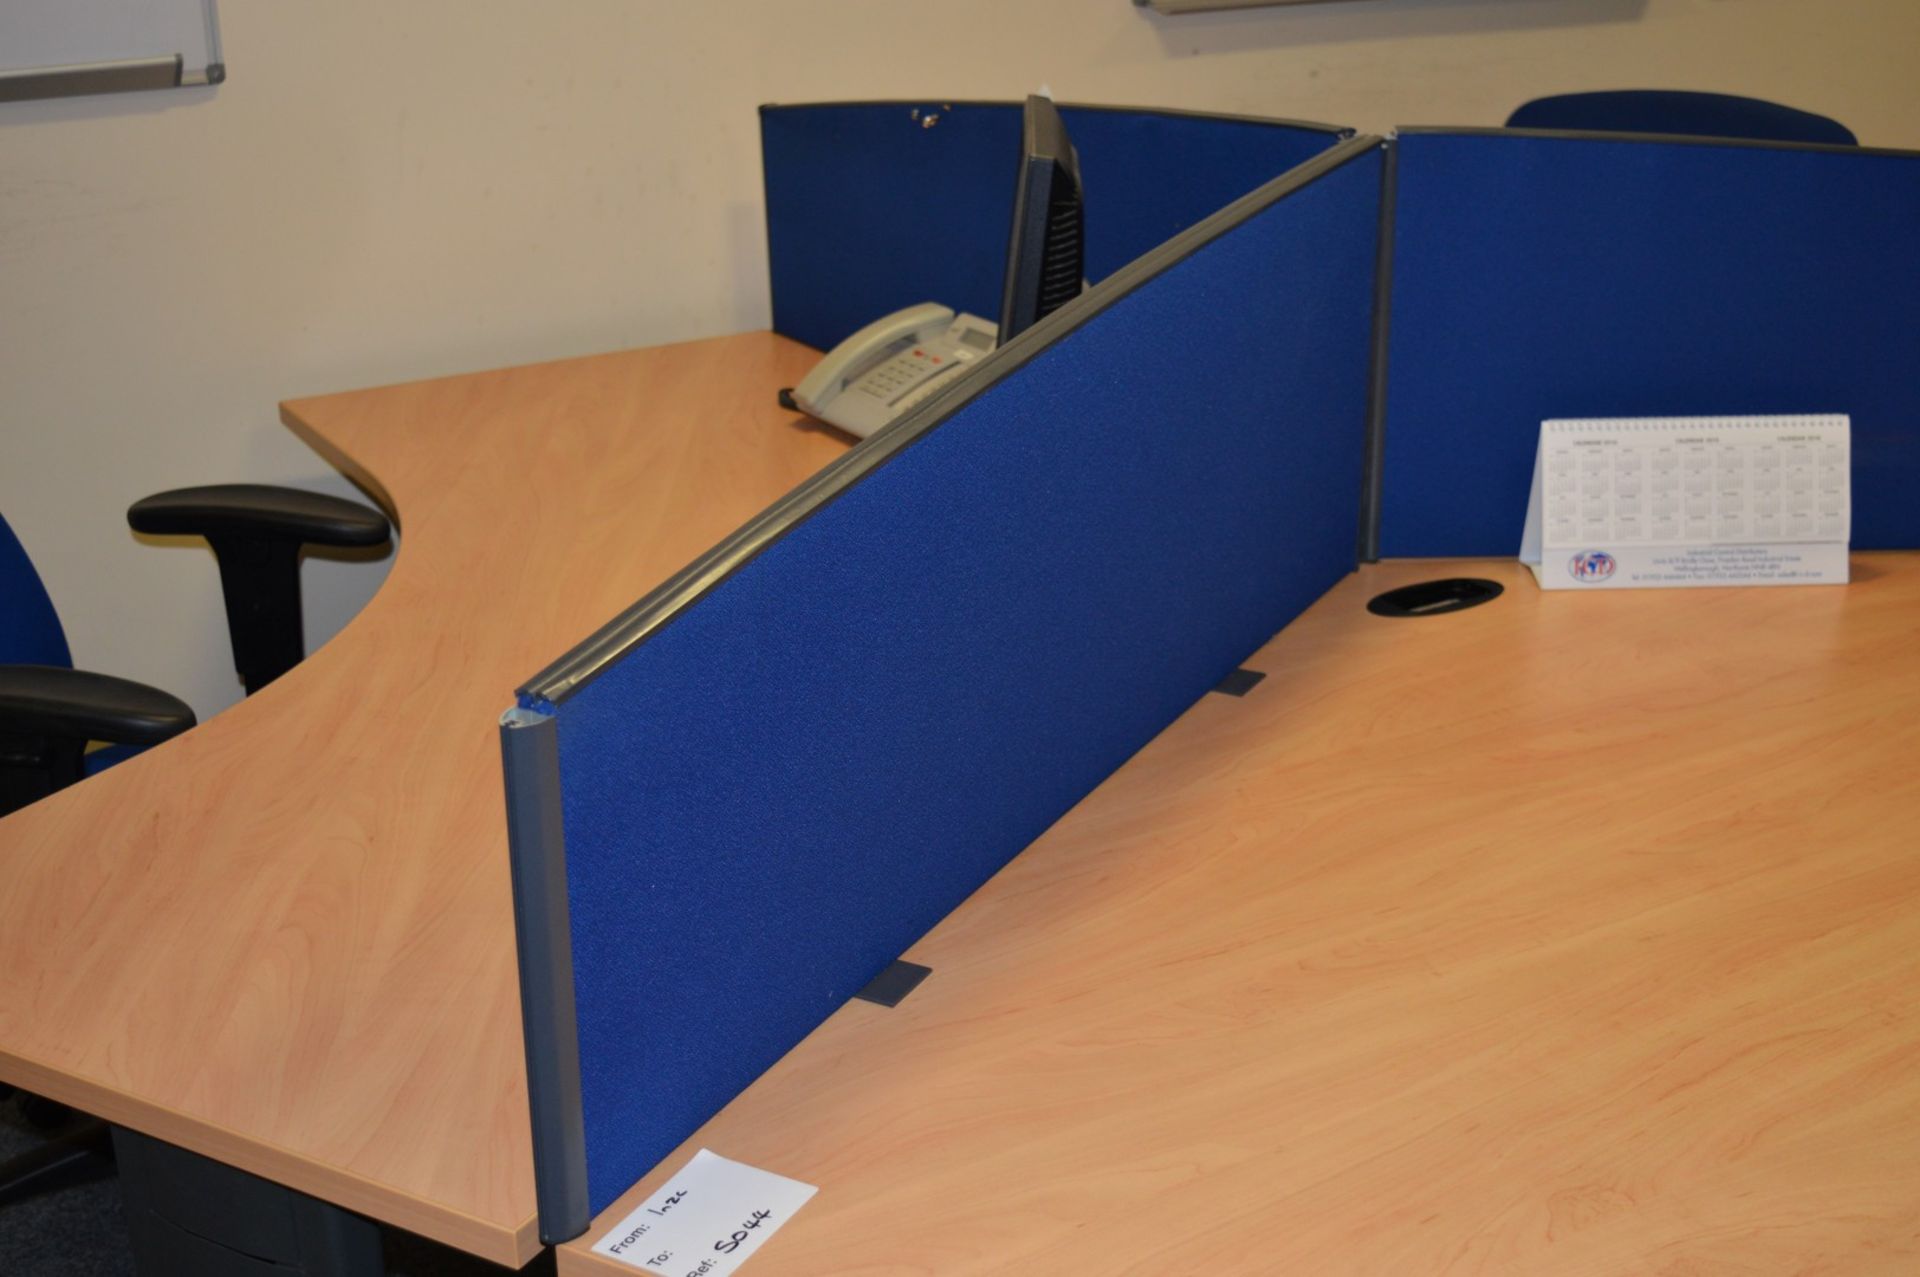 1 x Tripod Office Workstation Desk With Chairs - Suitable For 3 Users - Includes Three Premium - Image 6 of 6